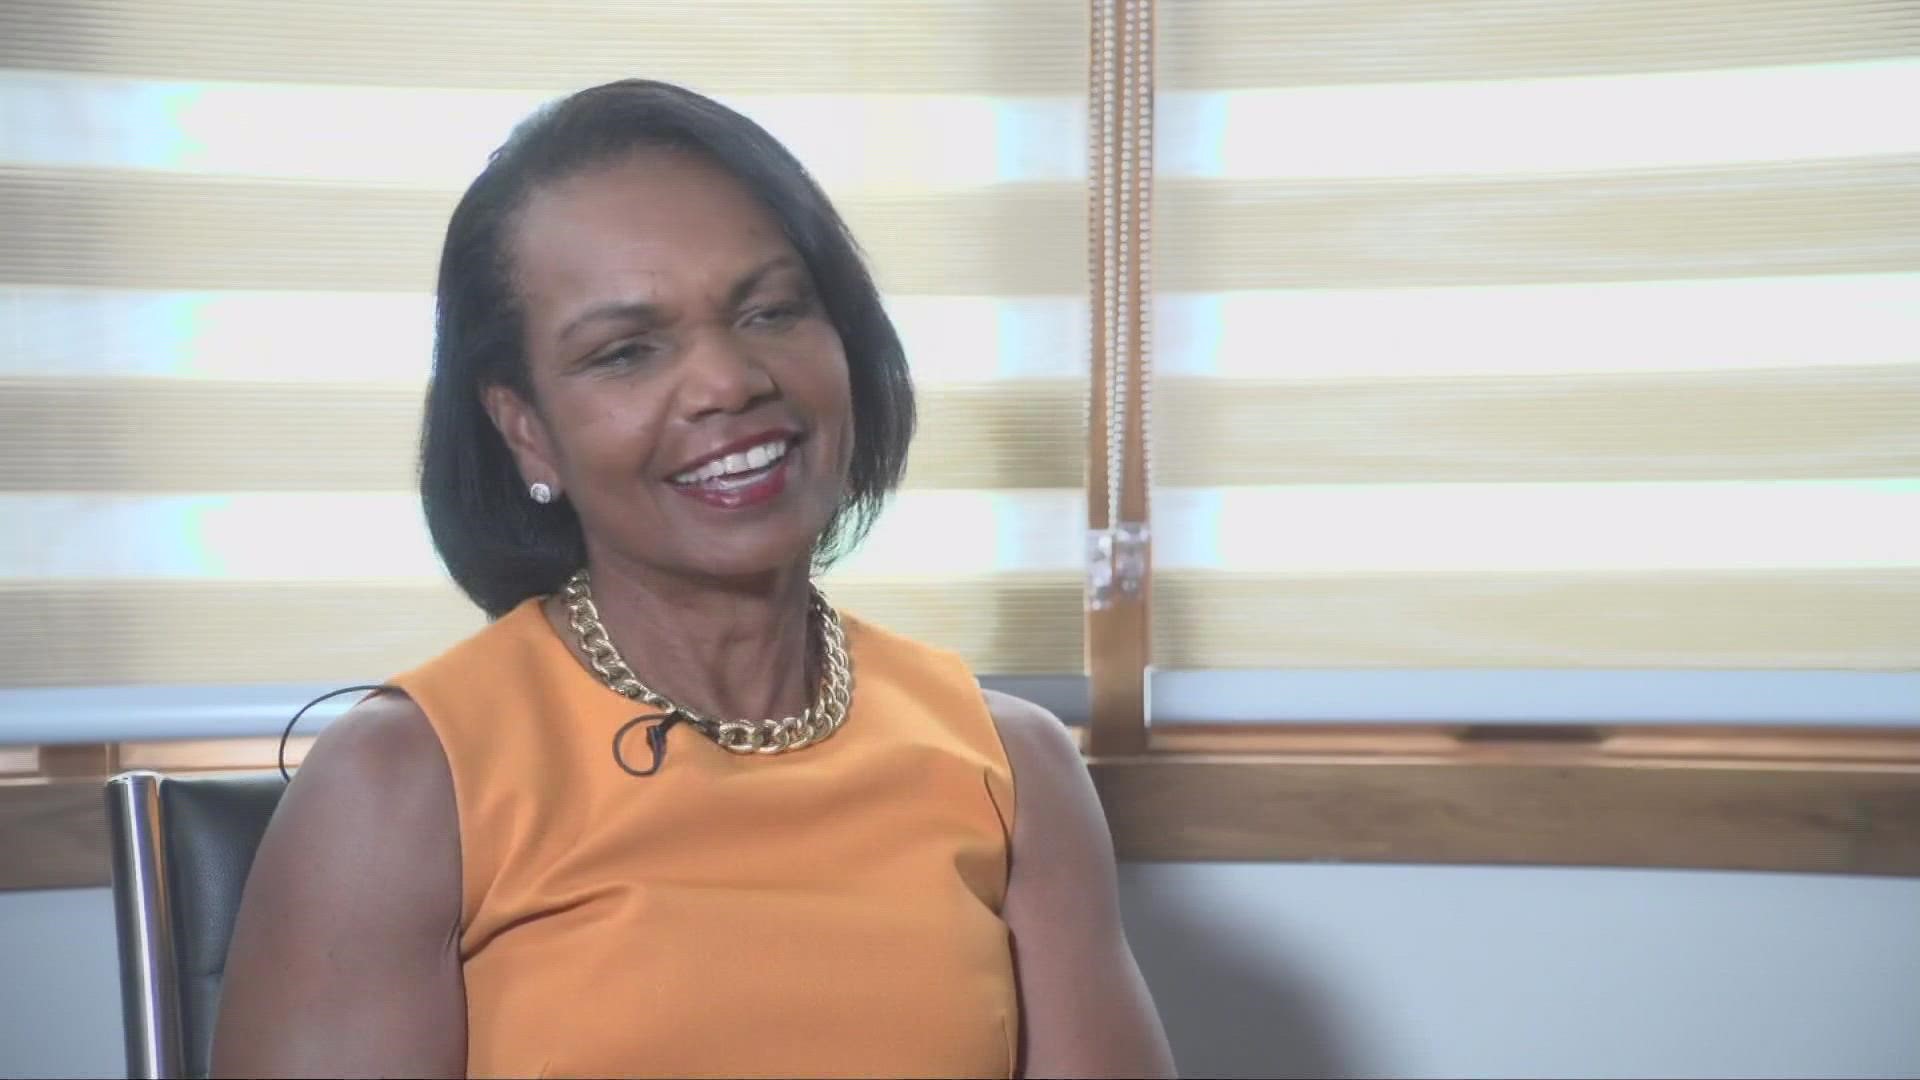 Former Secretary of State Condoleeza Rice sat down with 3News' Russ Mitchell in a wide-ranging interview at the Bridgestone Senior Players Championship in Akron.